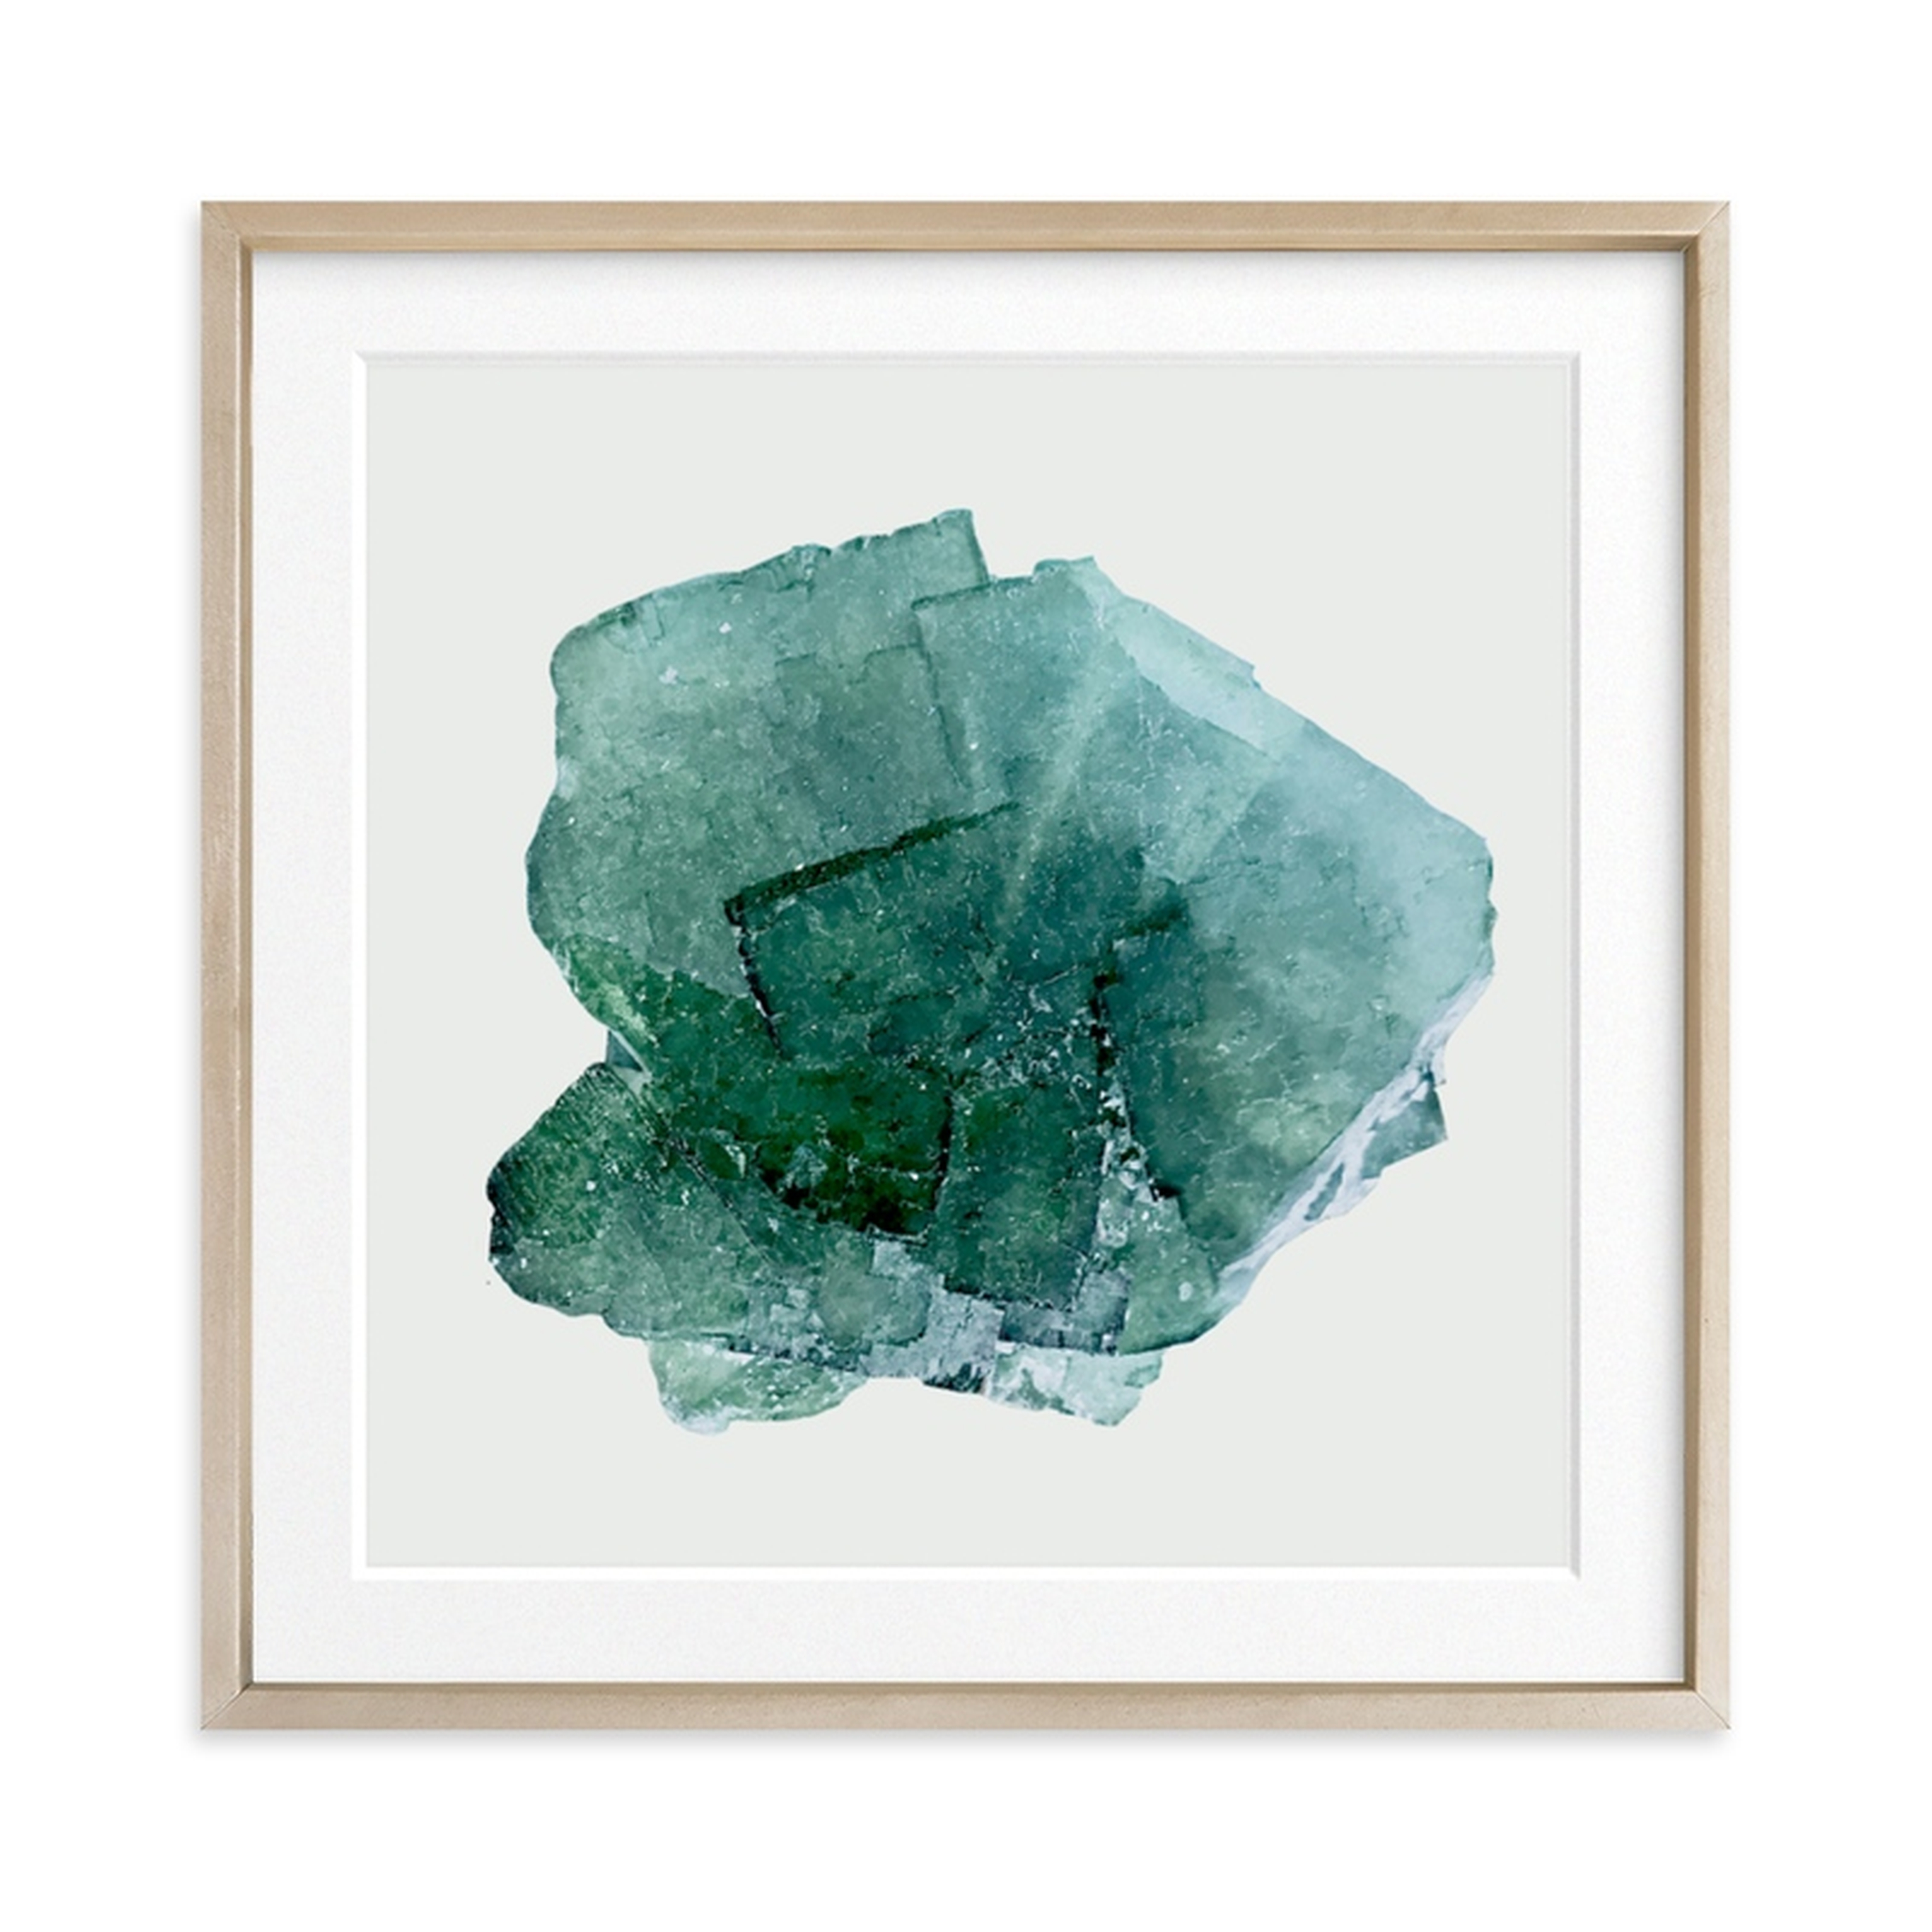 teal beach glass - 24 x 24, matted - Minted